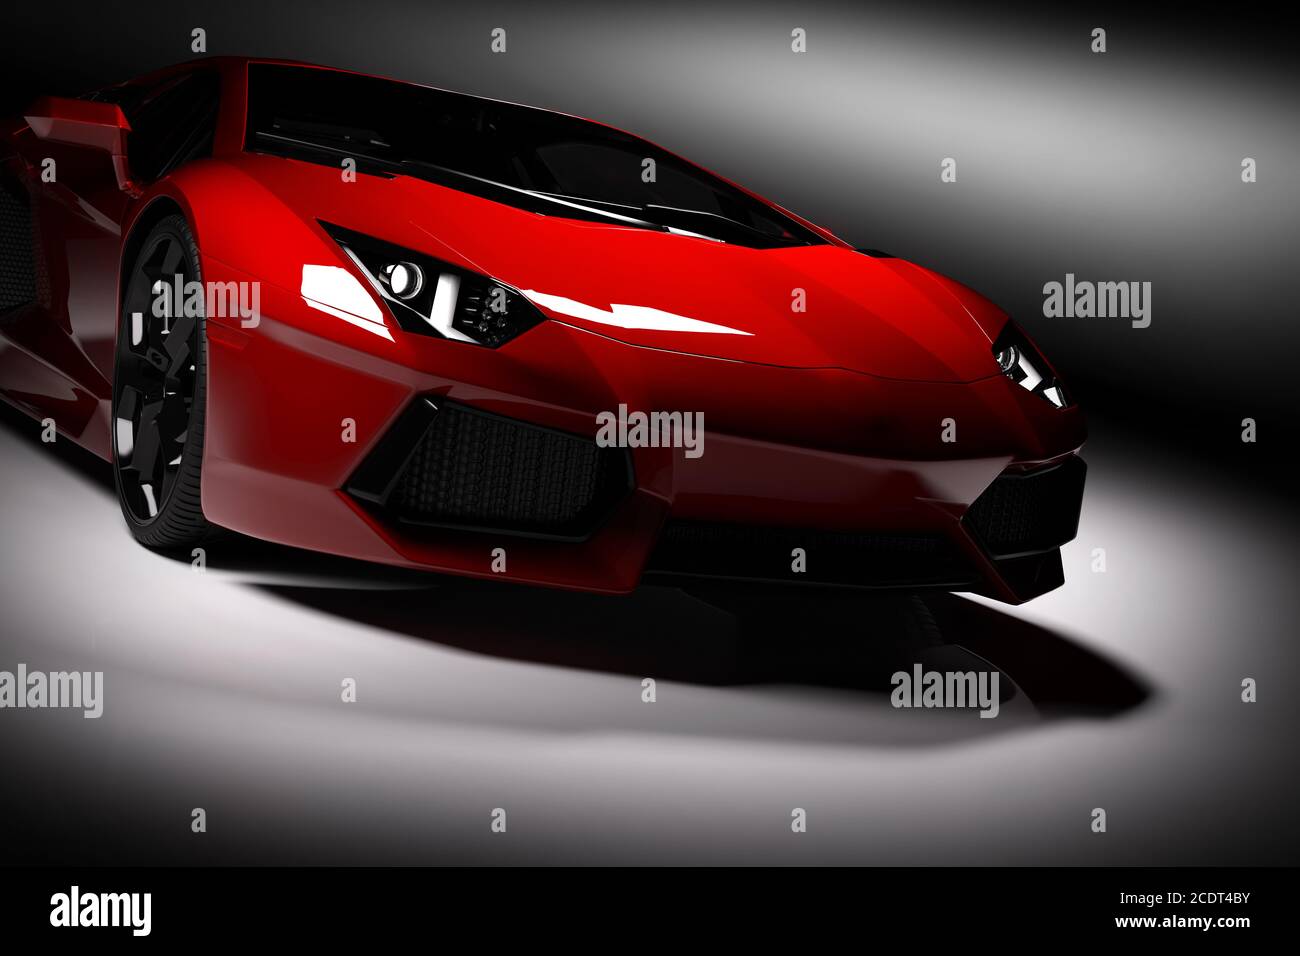 Red fast sports car in spotlight, black background. Shiny, new, luxurious. Stock Photo